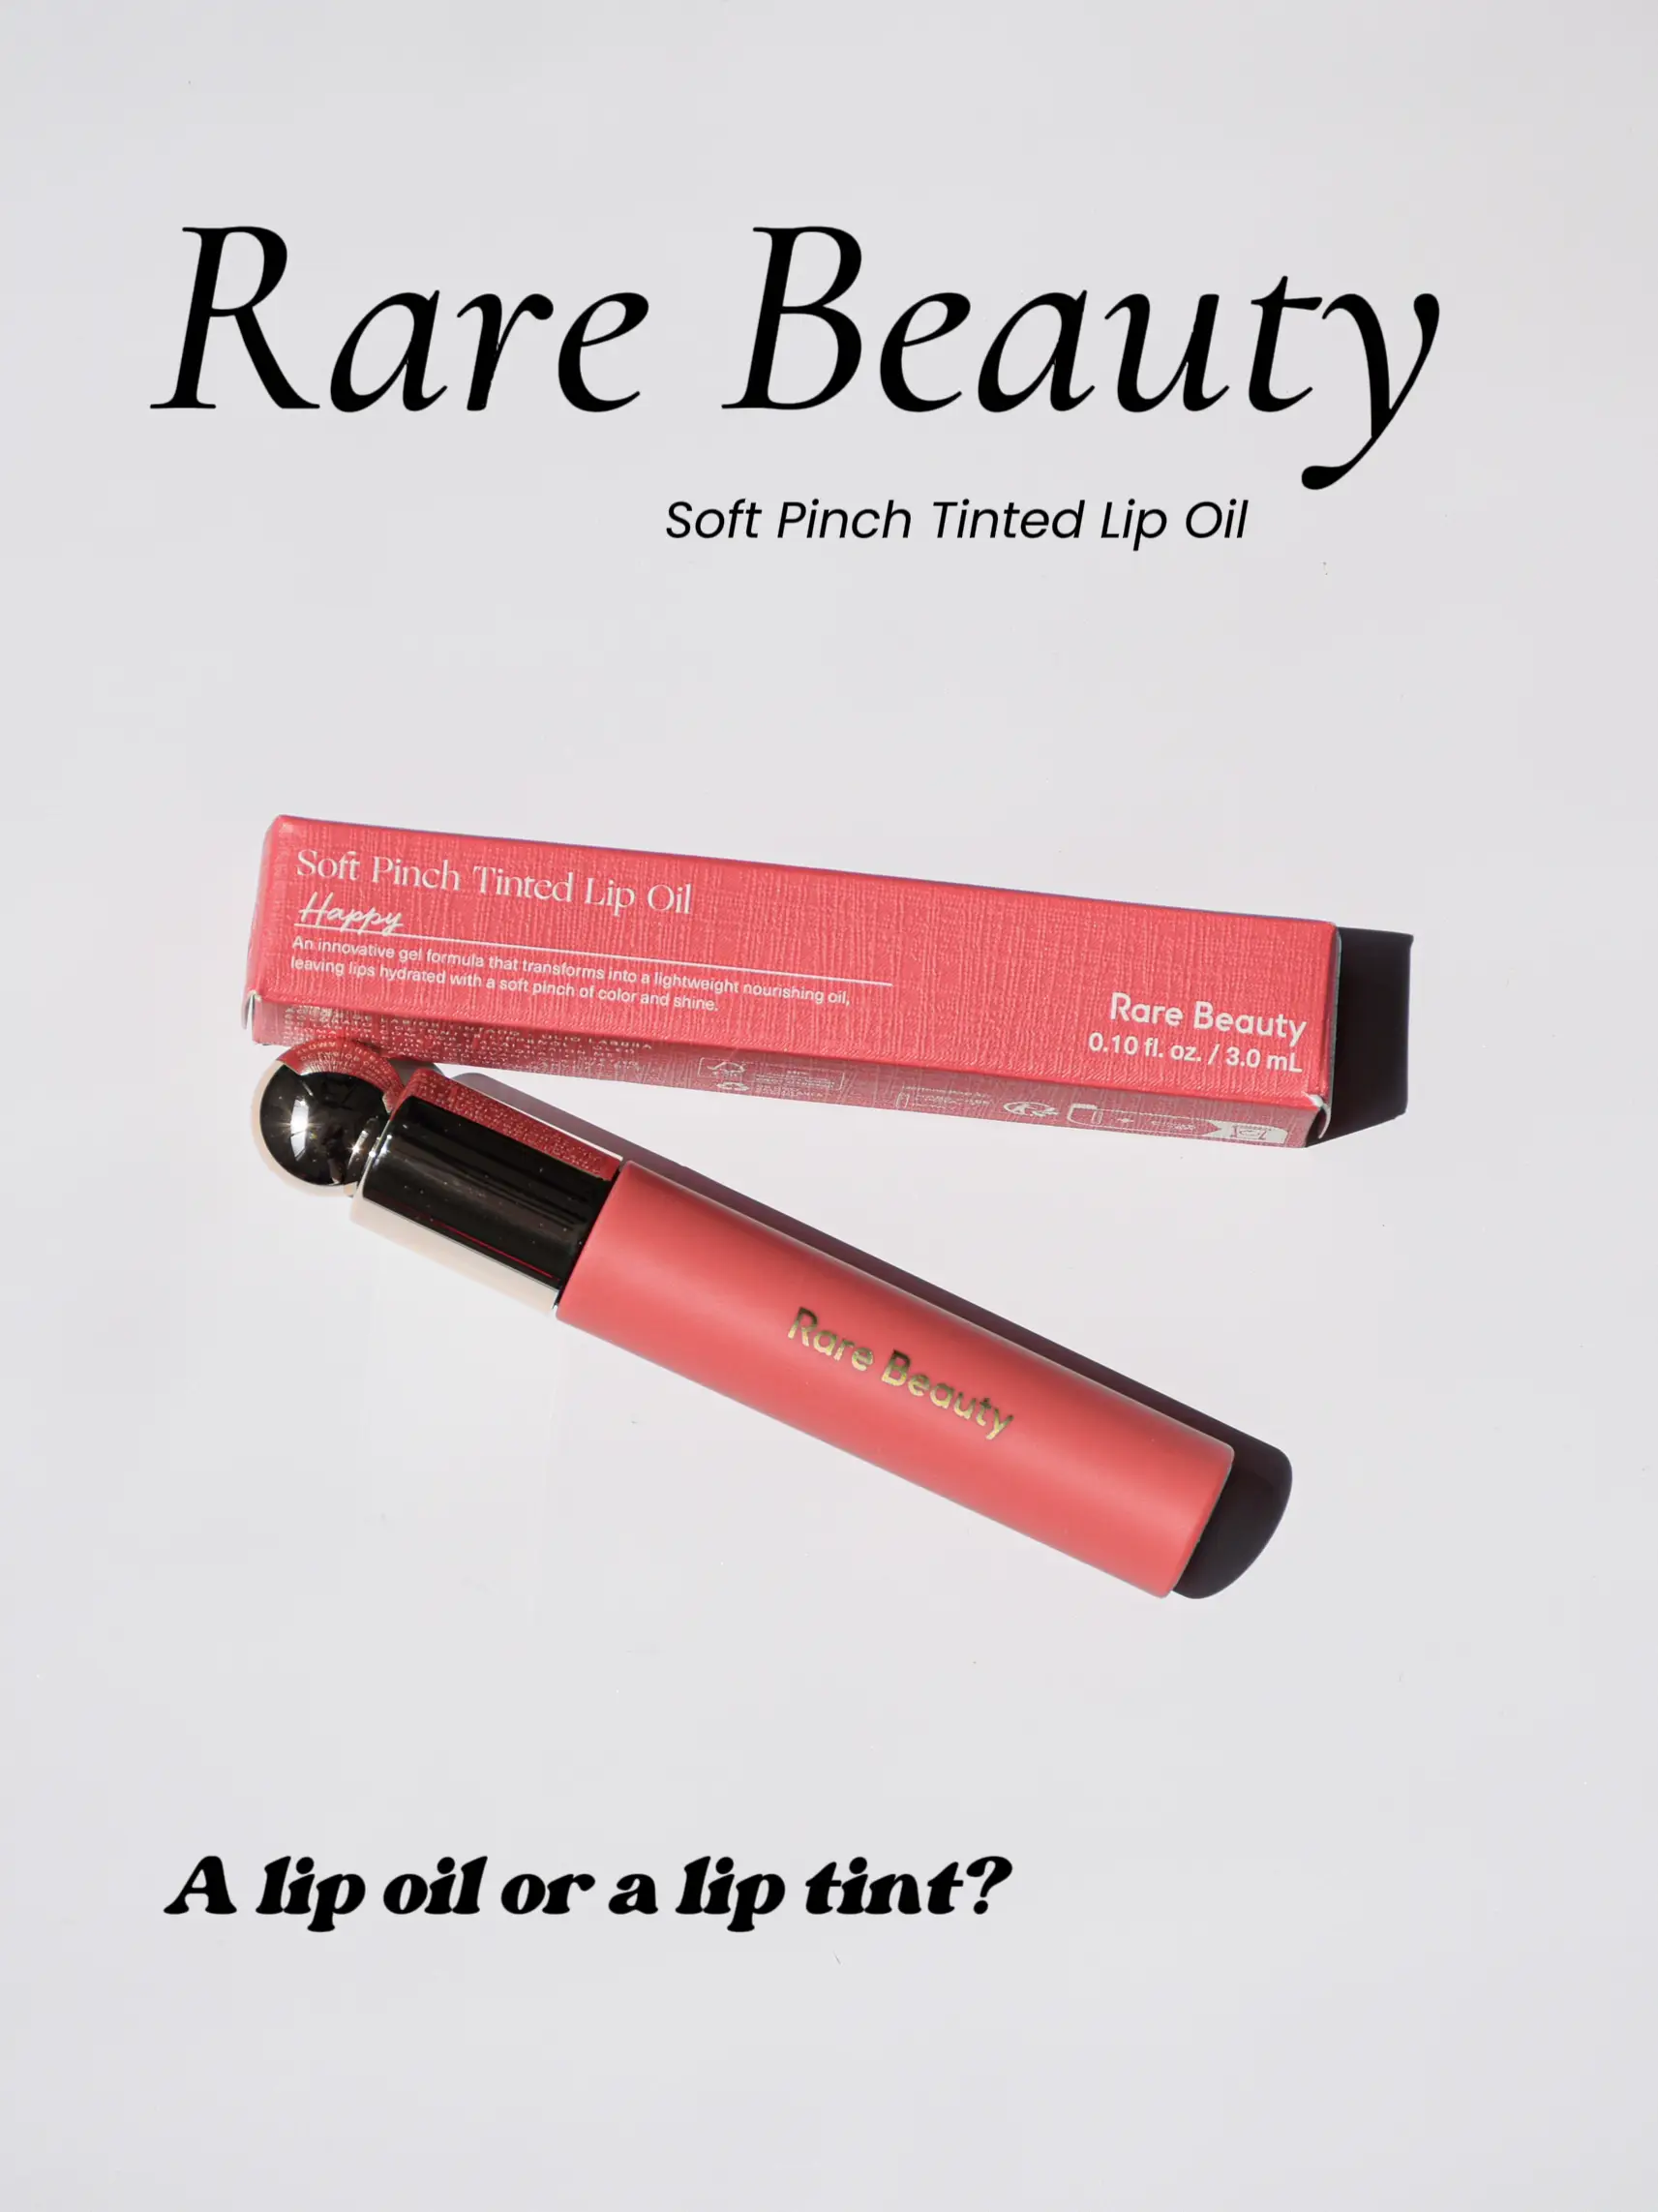 Rare Beauty Happy Soft Pinch Tinted Lip Oil Review & Swatches